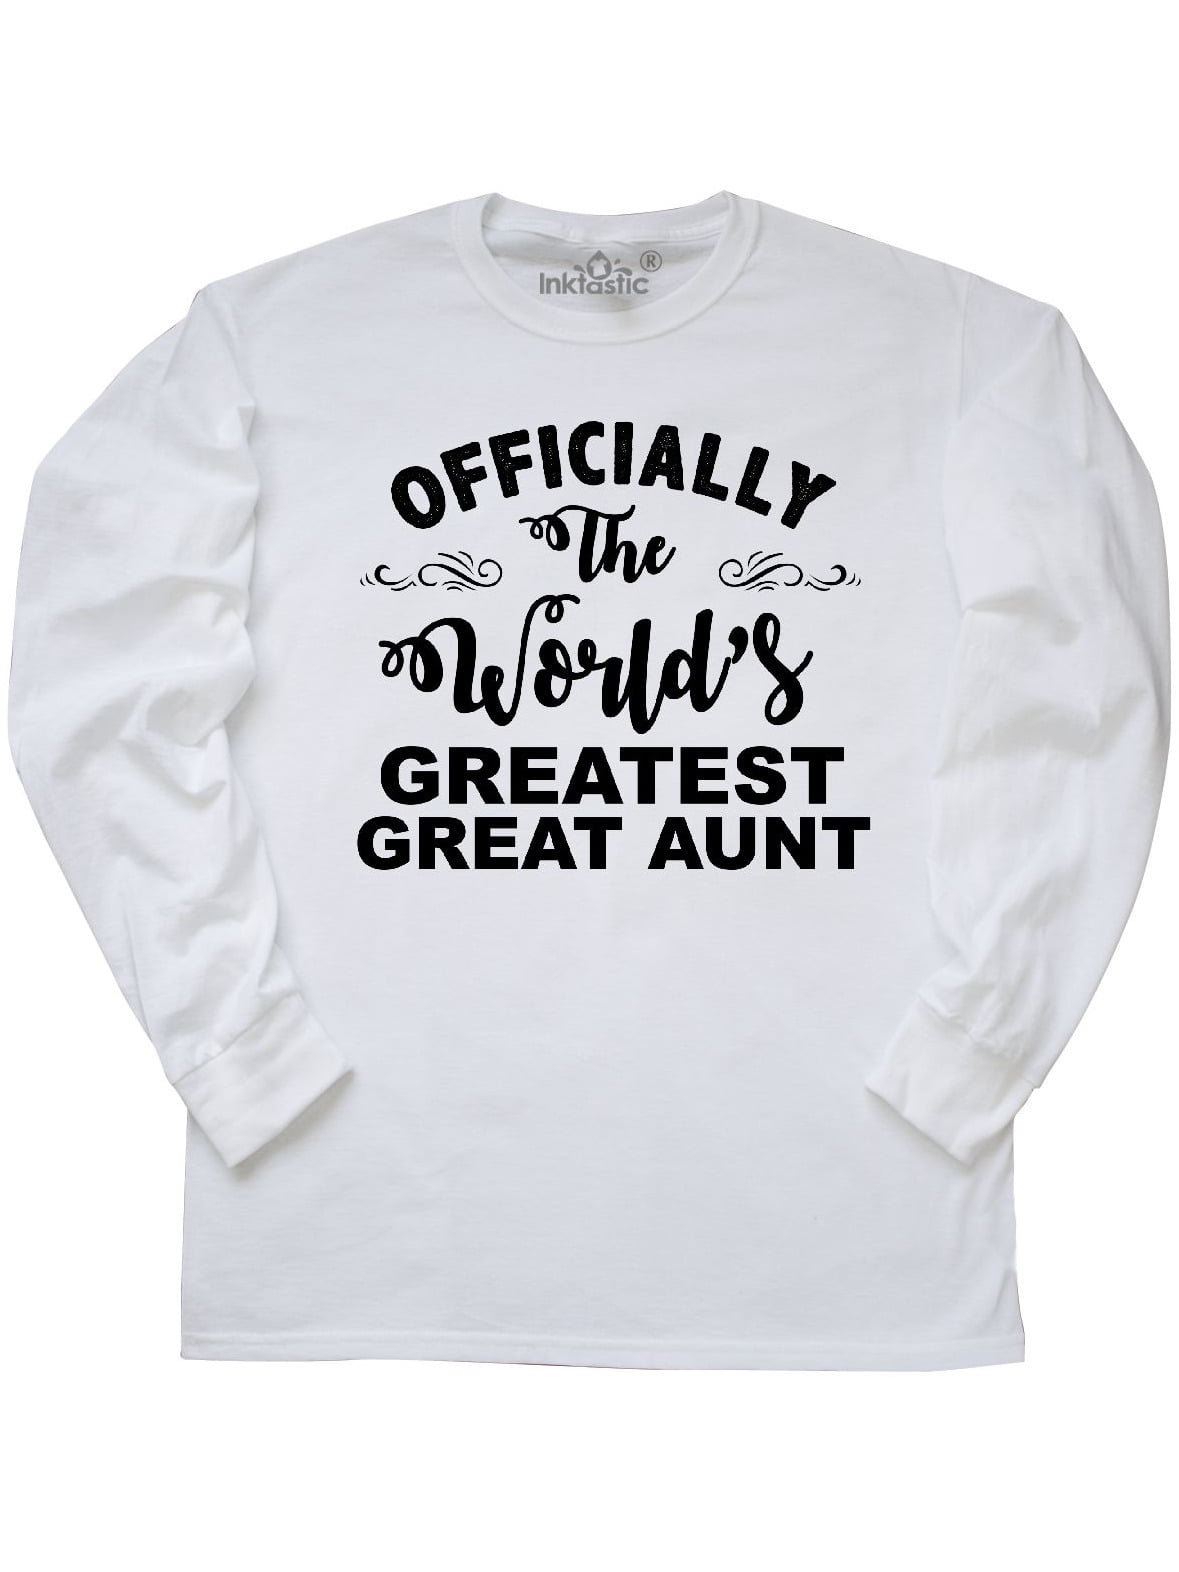 Inktastic Officially The World's Greatest Great Aunt T-Shirt Best Mens Adult 